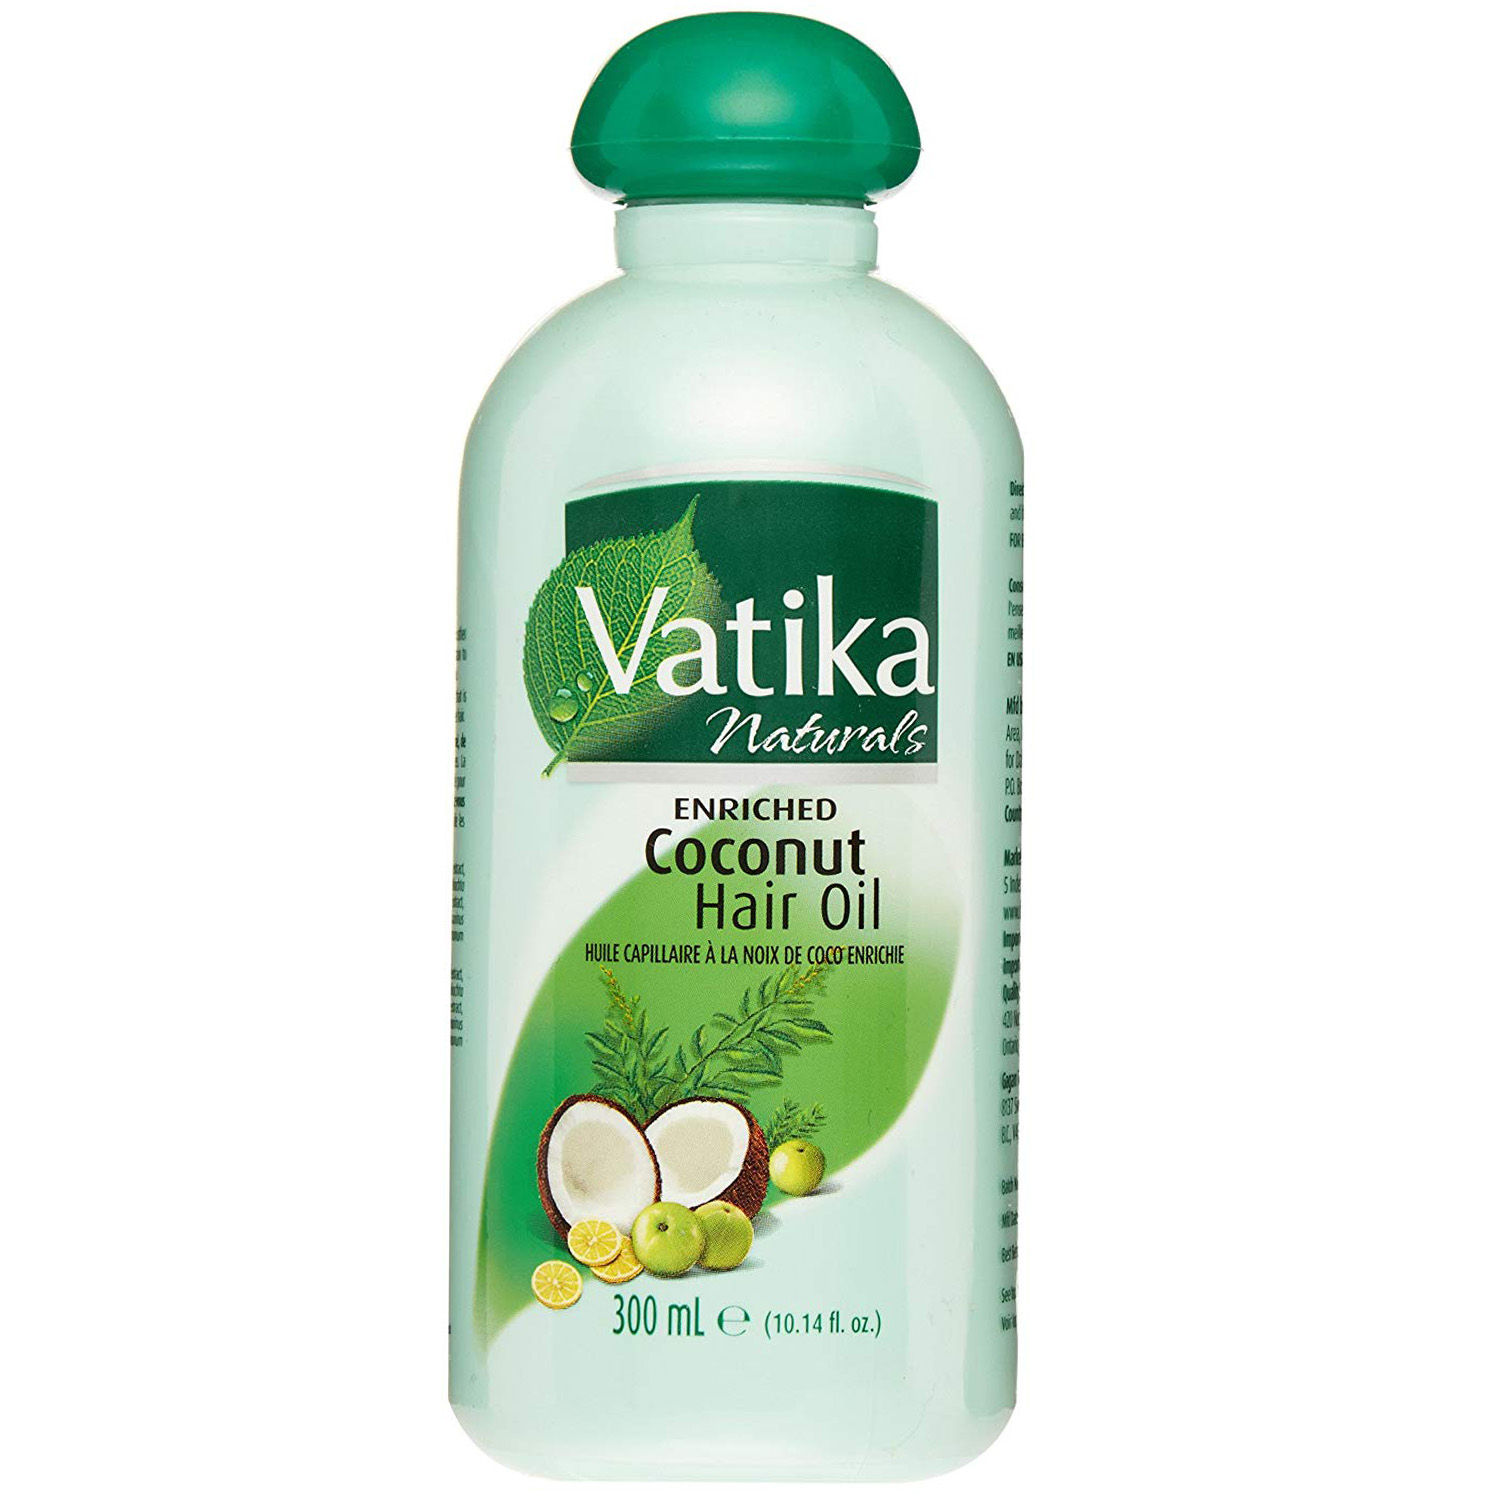 Vatika Enriched Coconut Hair Oil, 300 ml Price, Uses, Side Effects,  Composition - Apollo Pharmacy